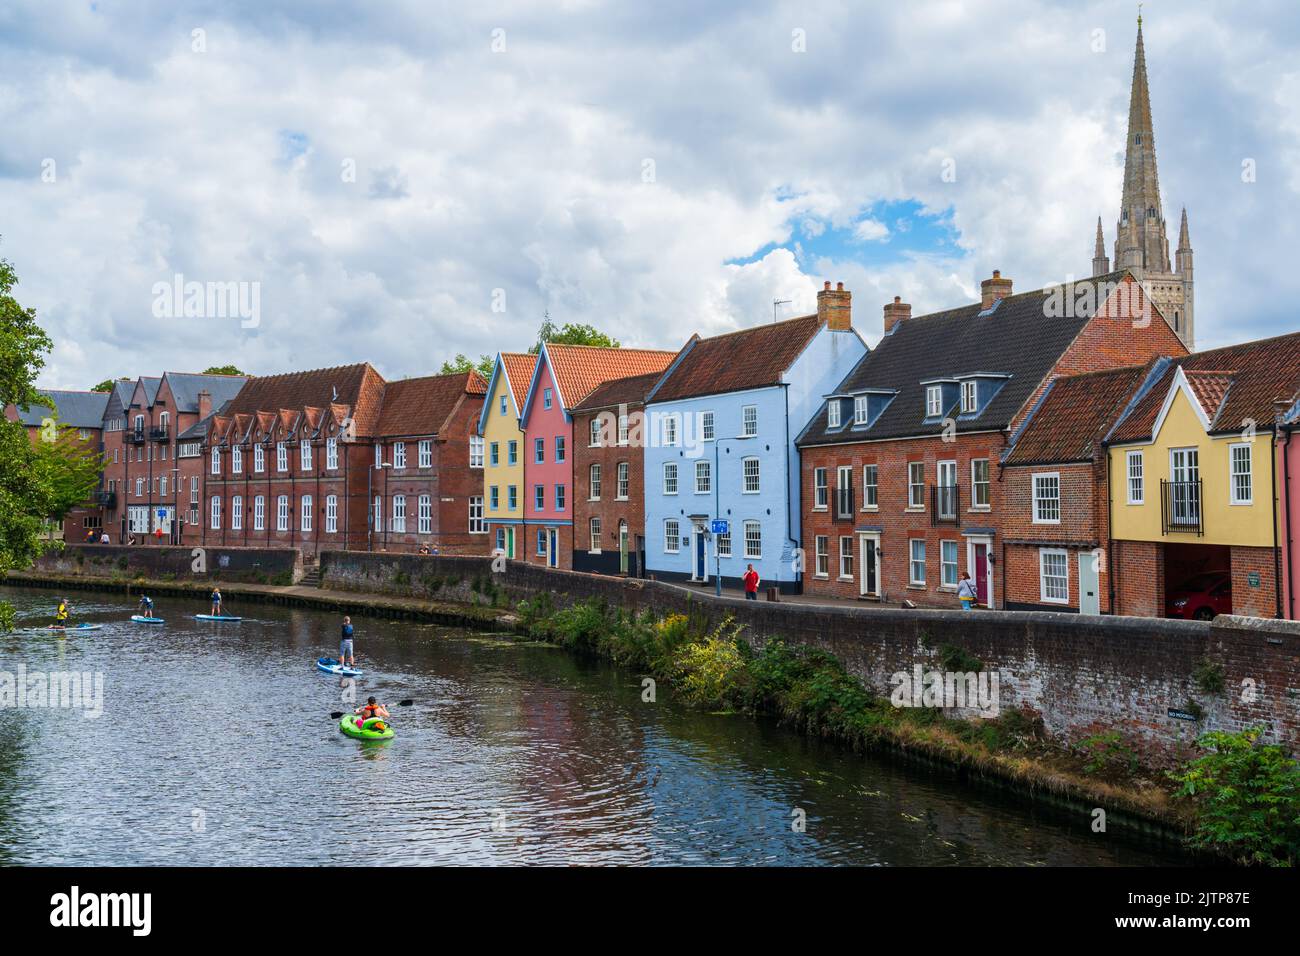 Colourful houses on Quayside in Norwich, North Norfolk, UK along the River Wensum with paddleboarders sailing passed Stock Photo